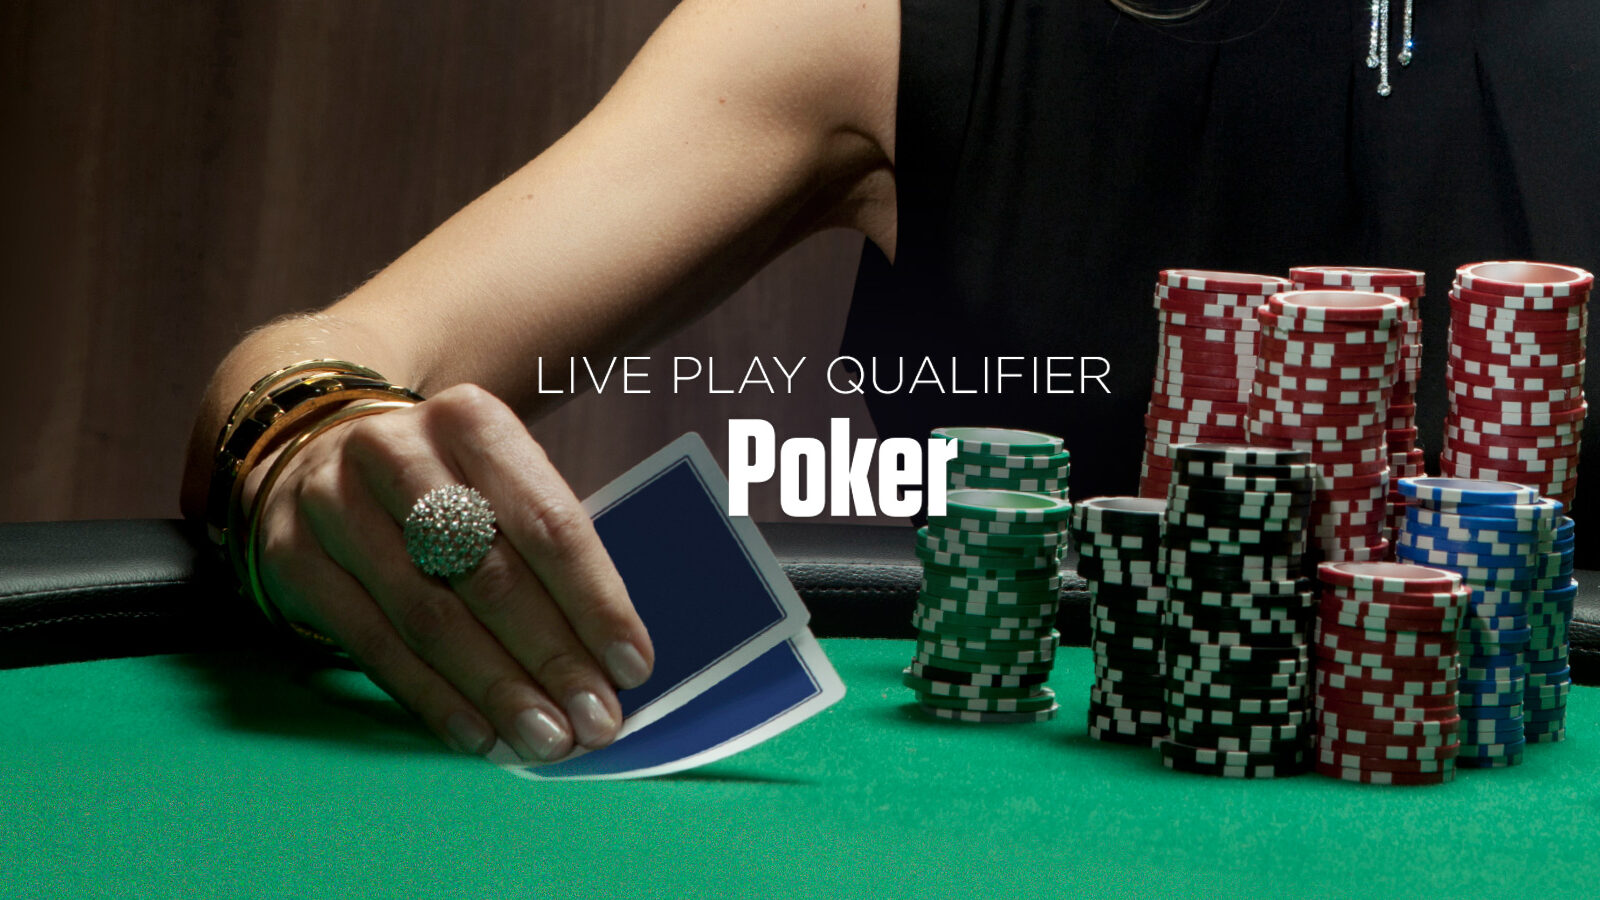 Cash Drawings For Live Play Poker Qualifiers